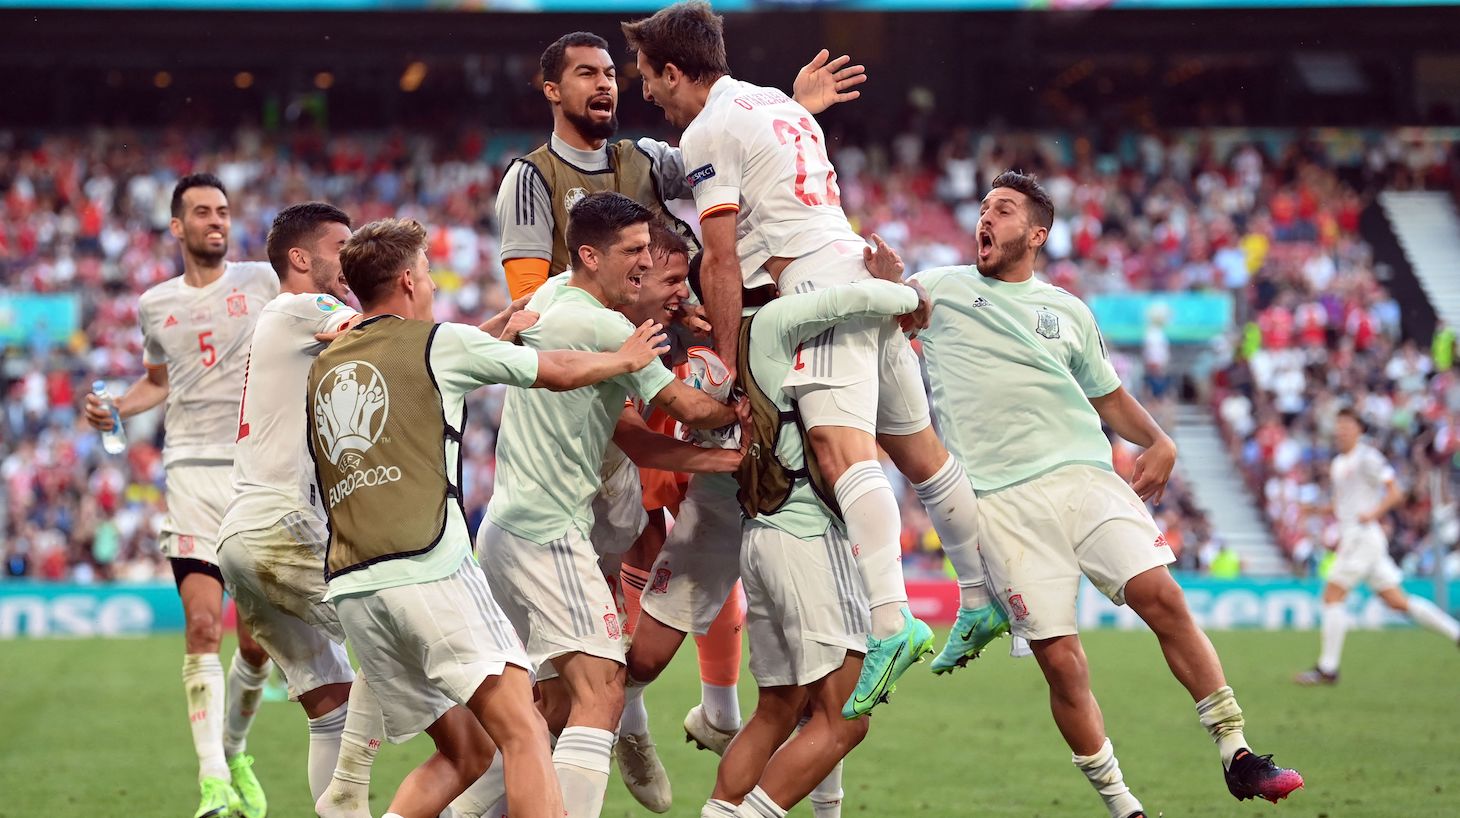 Spain's players celebrate their fifth goal during the UEFA EURO 2020 round of 16 football match between Croatia and Spain at the Parken Stadium in Copenhagen on June 28, 2021.